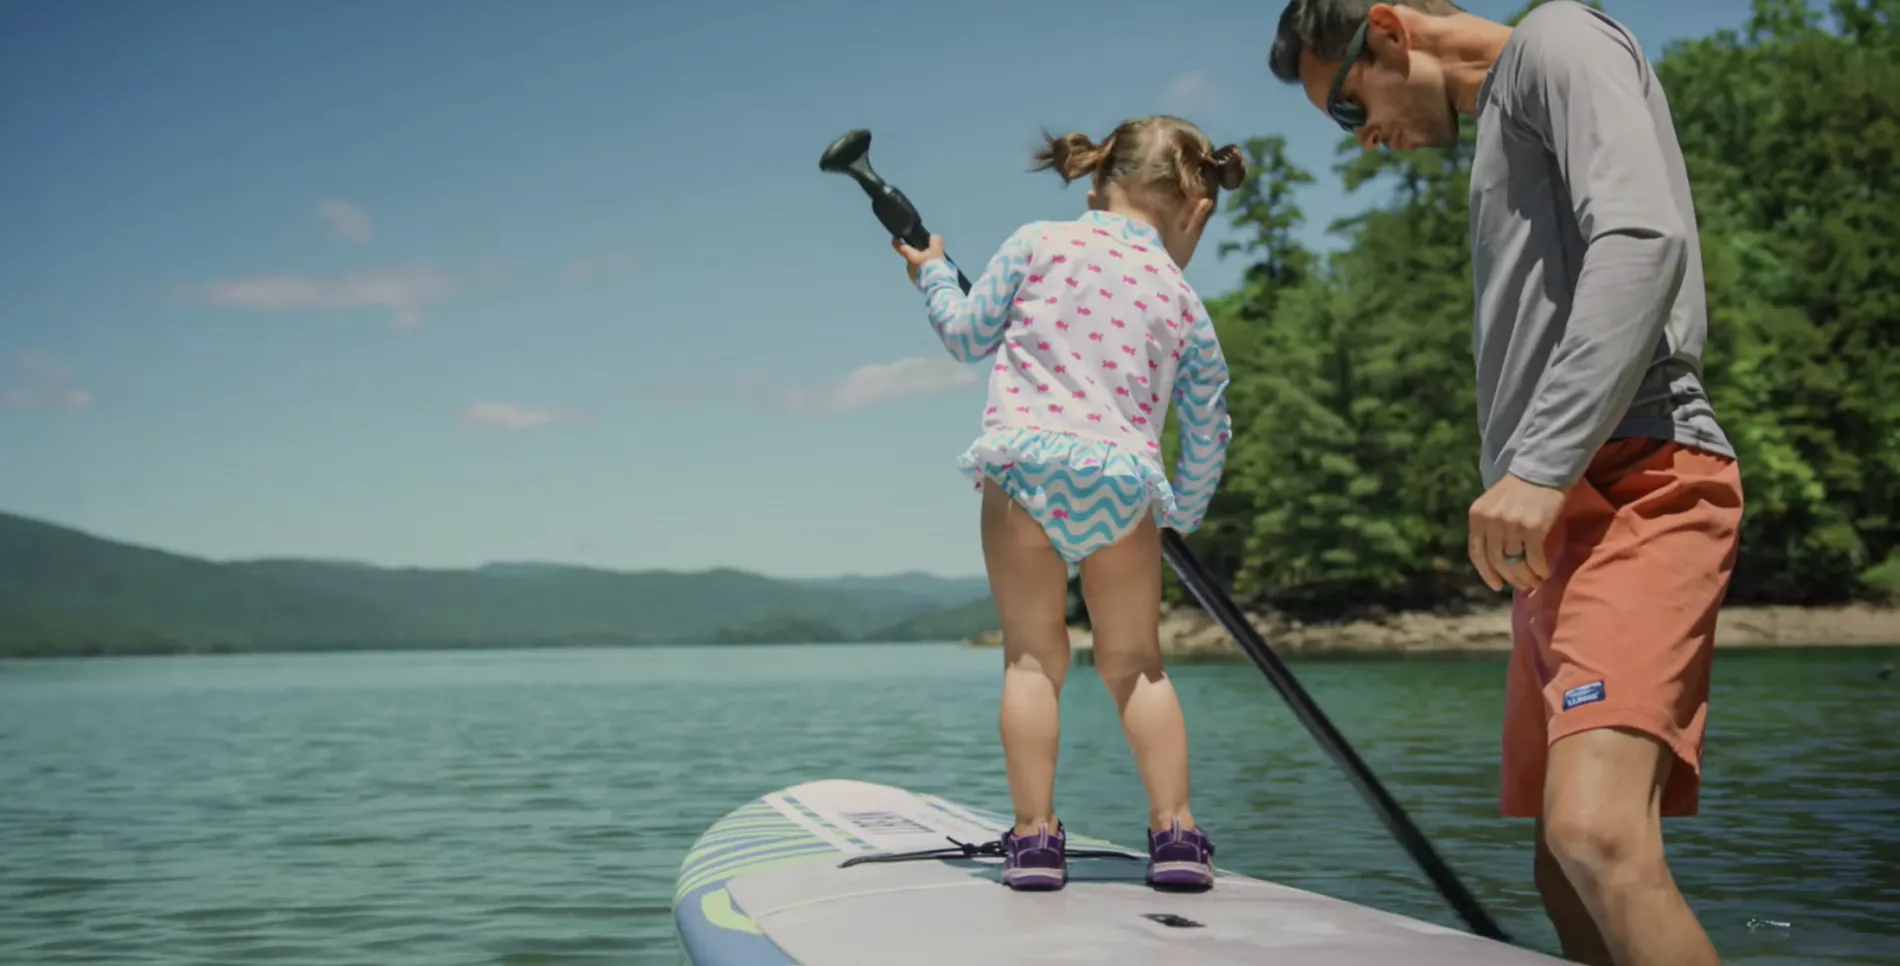 Father and daughter standing on paddle board